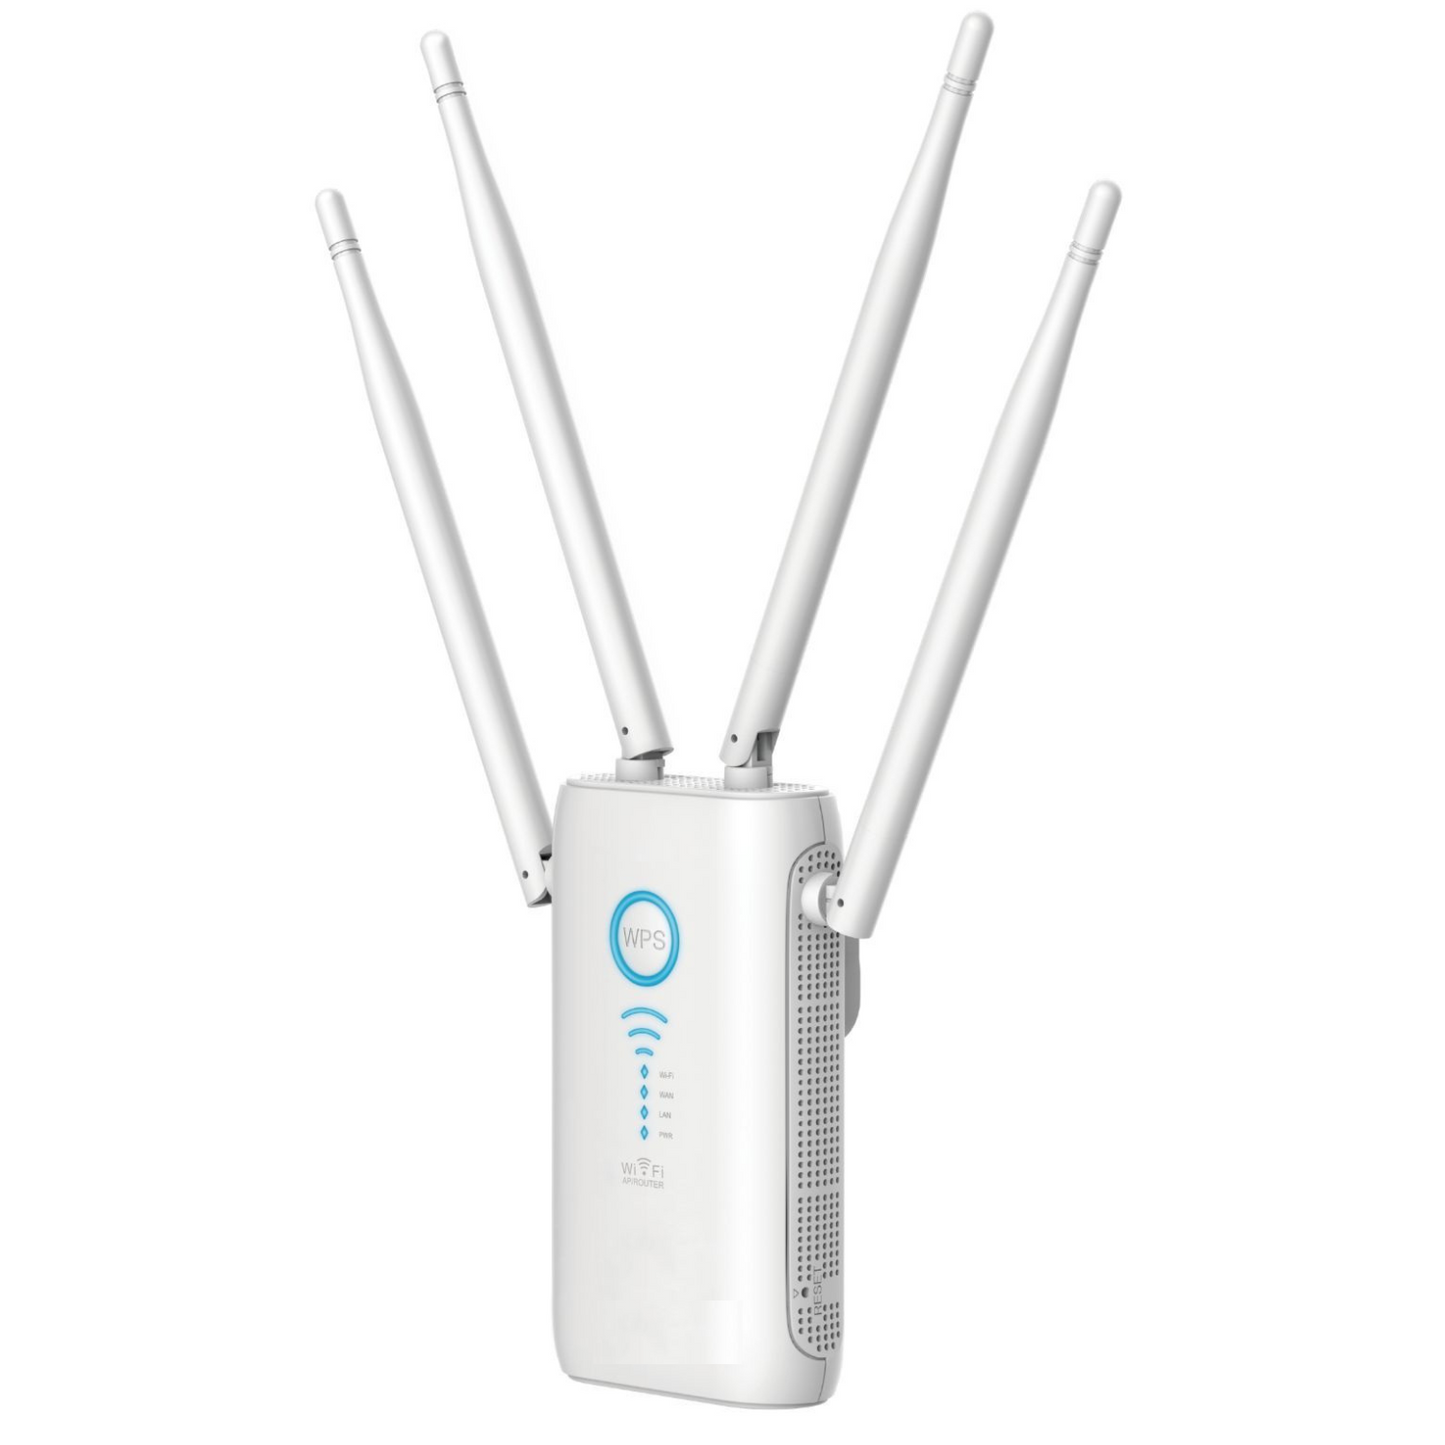 Wireless Plug In Wifi Internet Repeater Signal Range Booster Extender